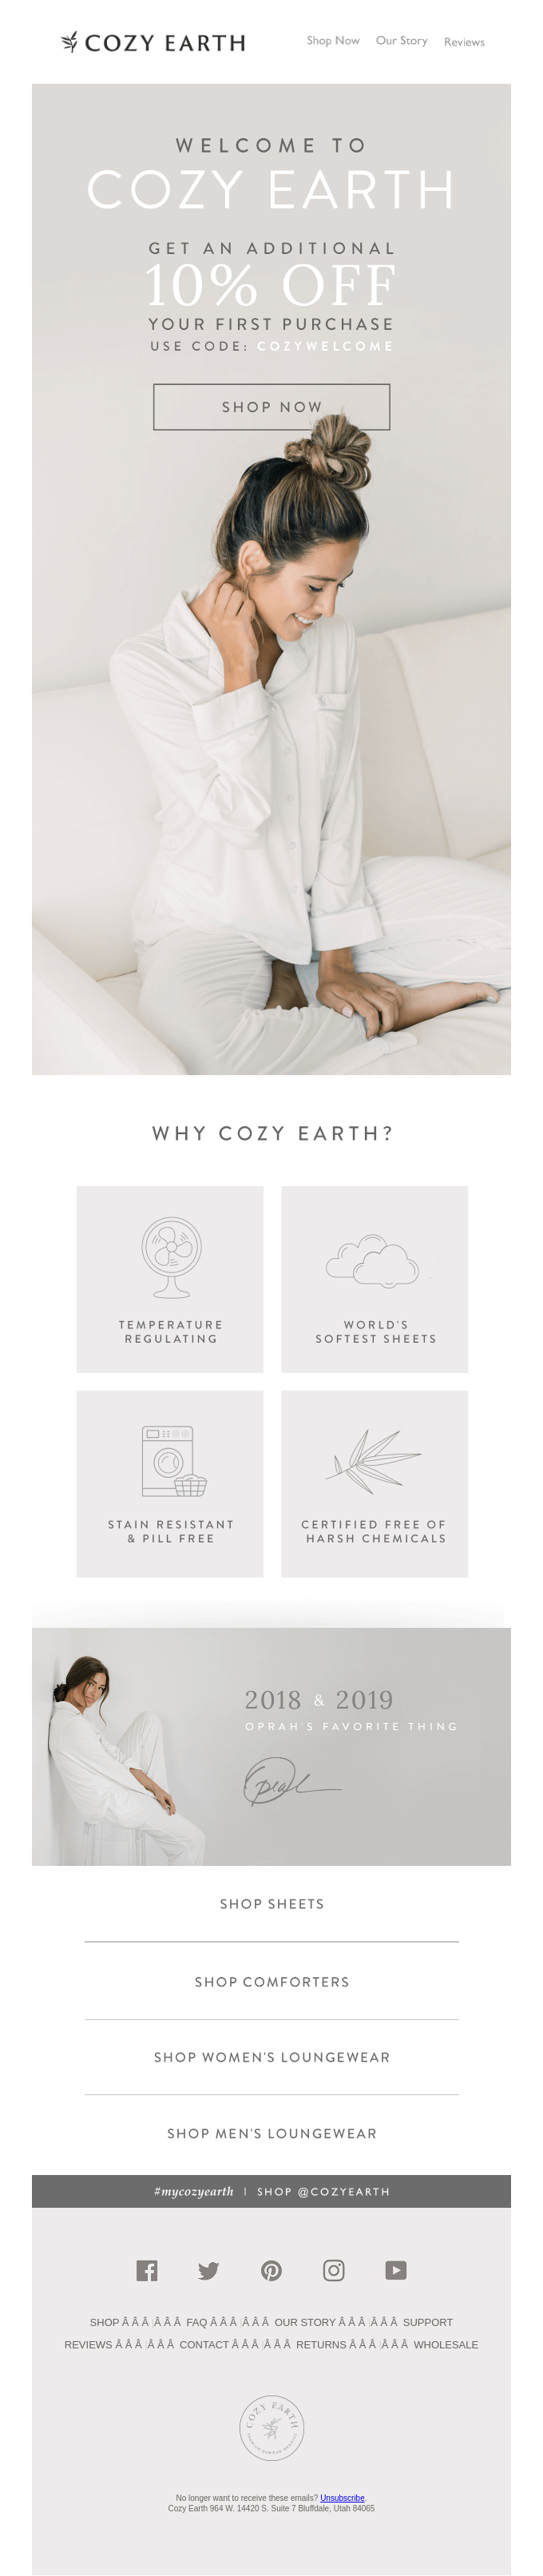 Welcome to Cozy Earth!